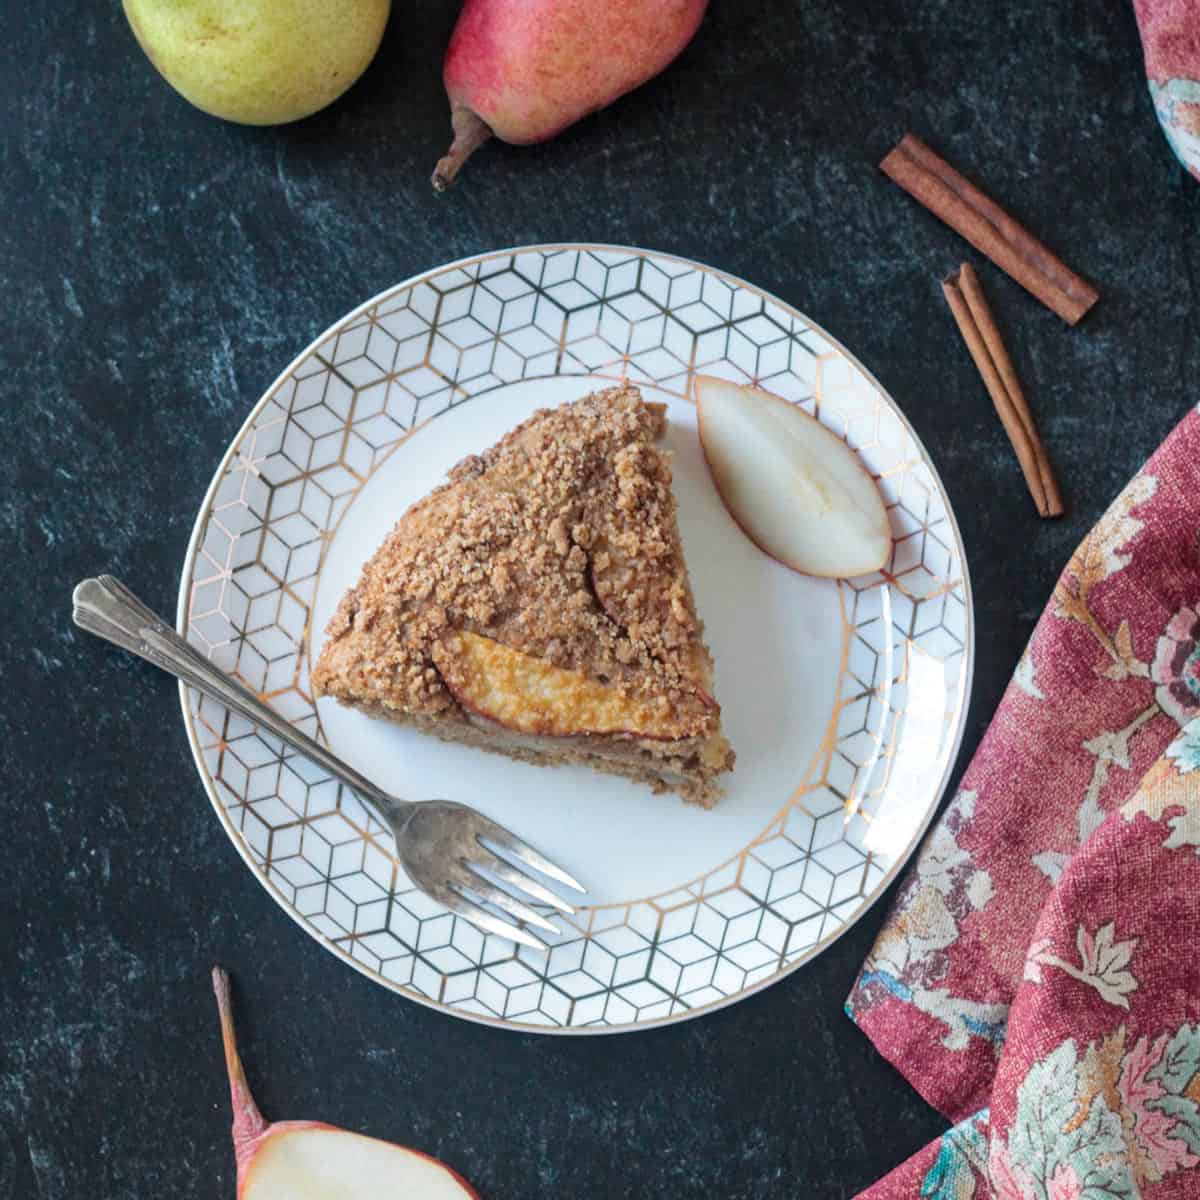 Spiced Vegan Pear Cake with Streusel Topping